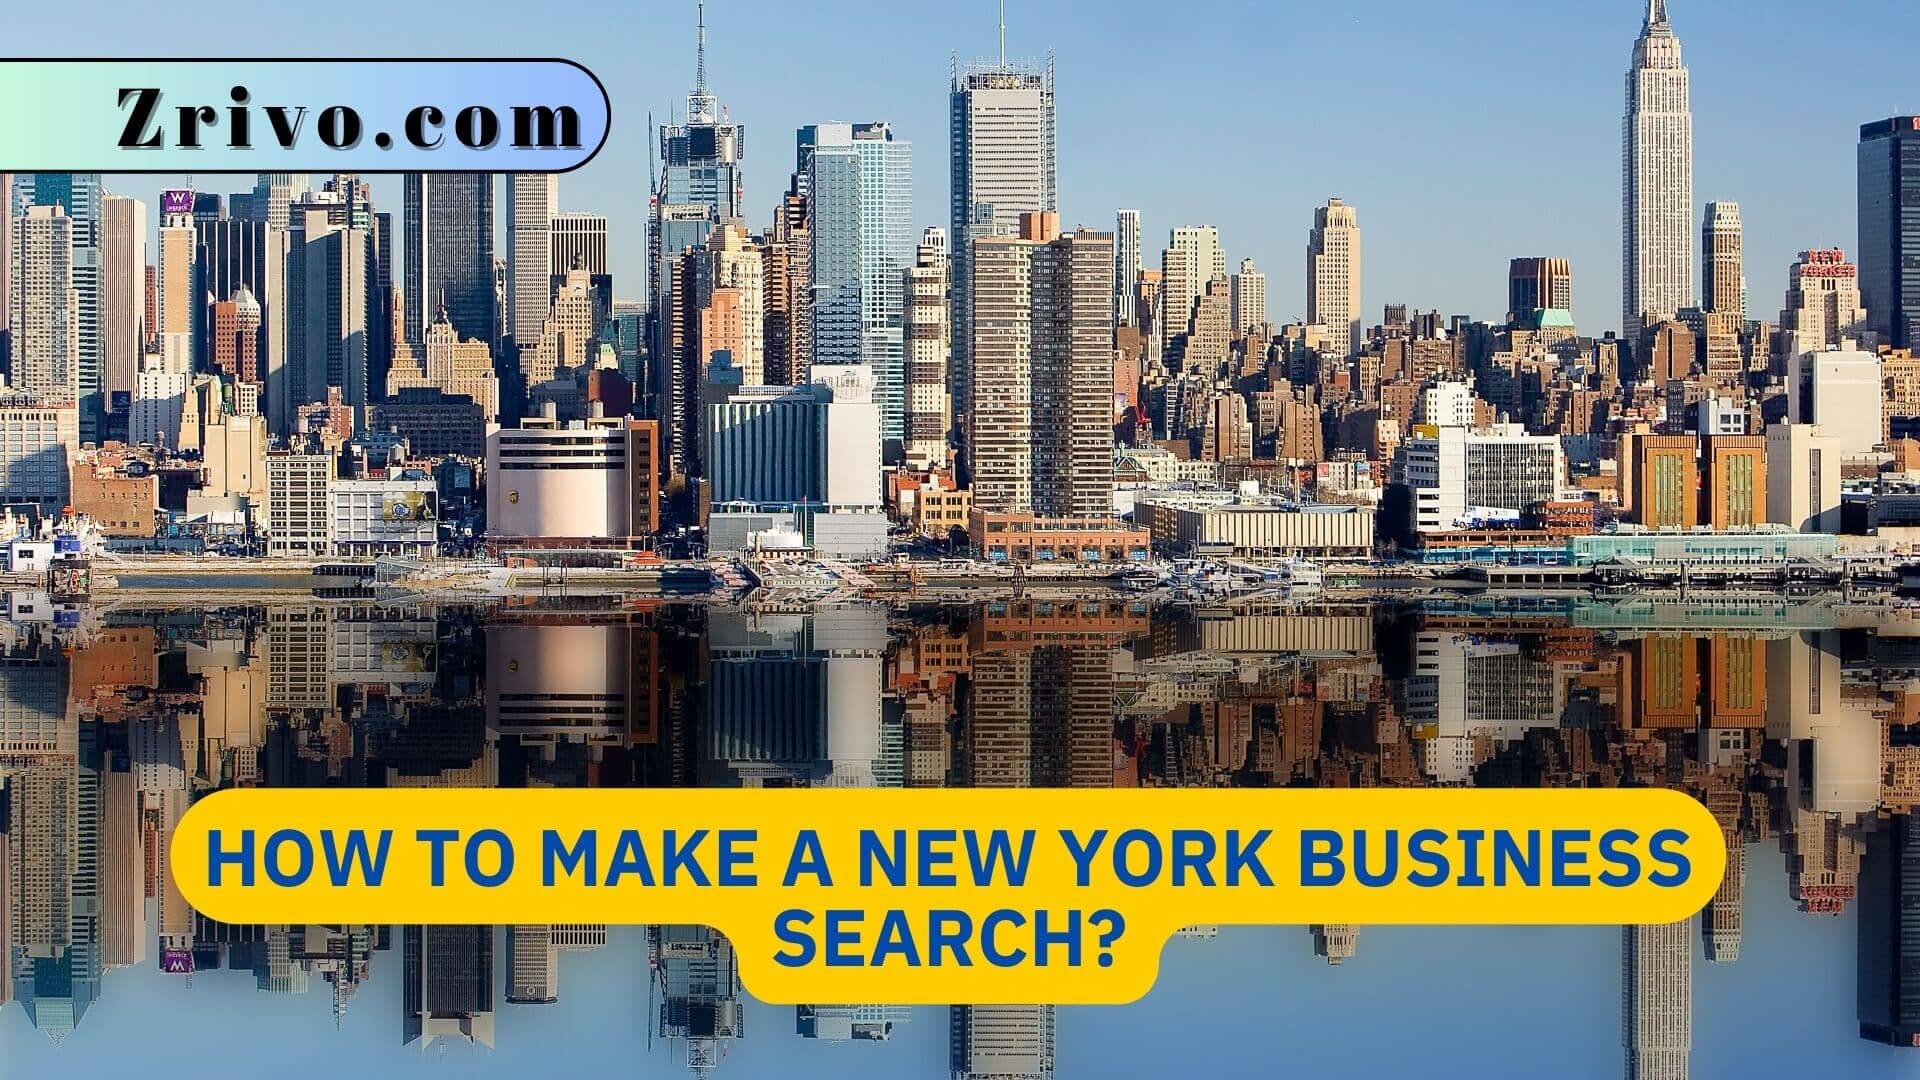 How To Make A New York Business Search?